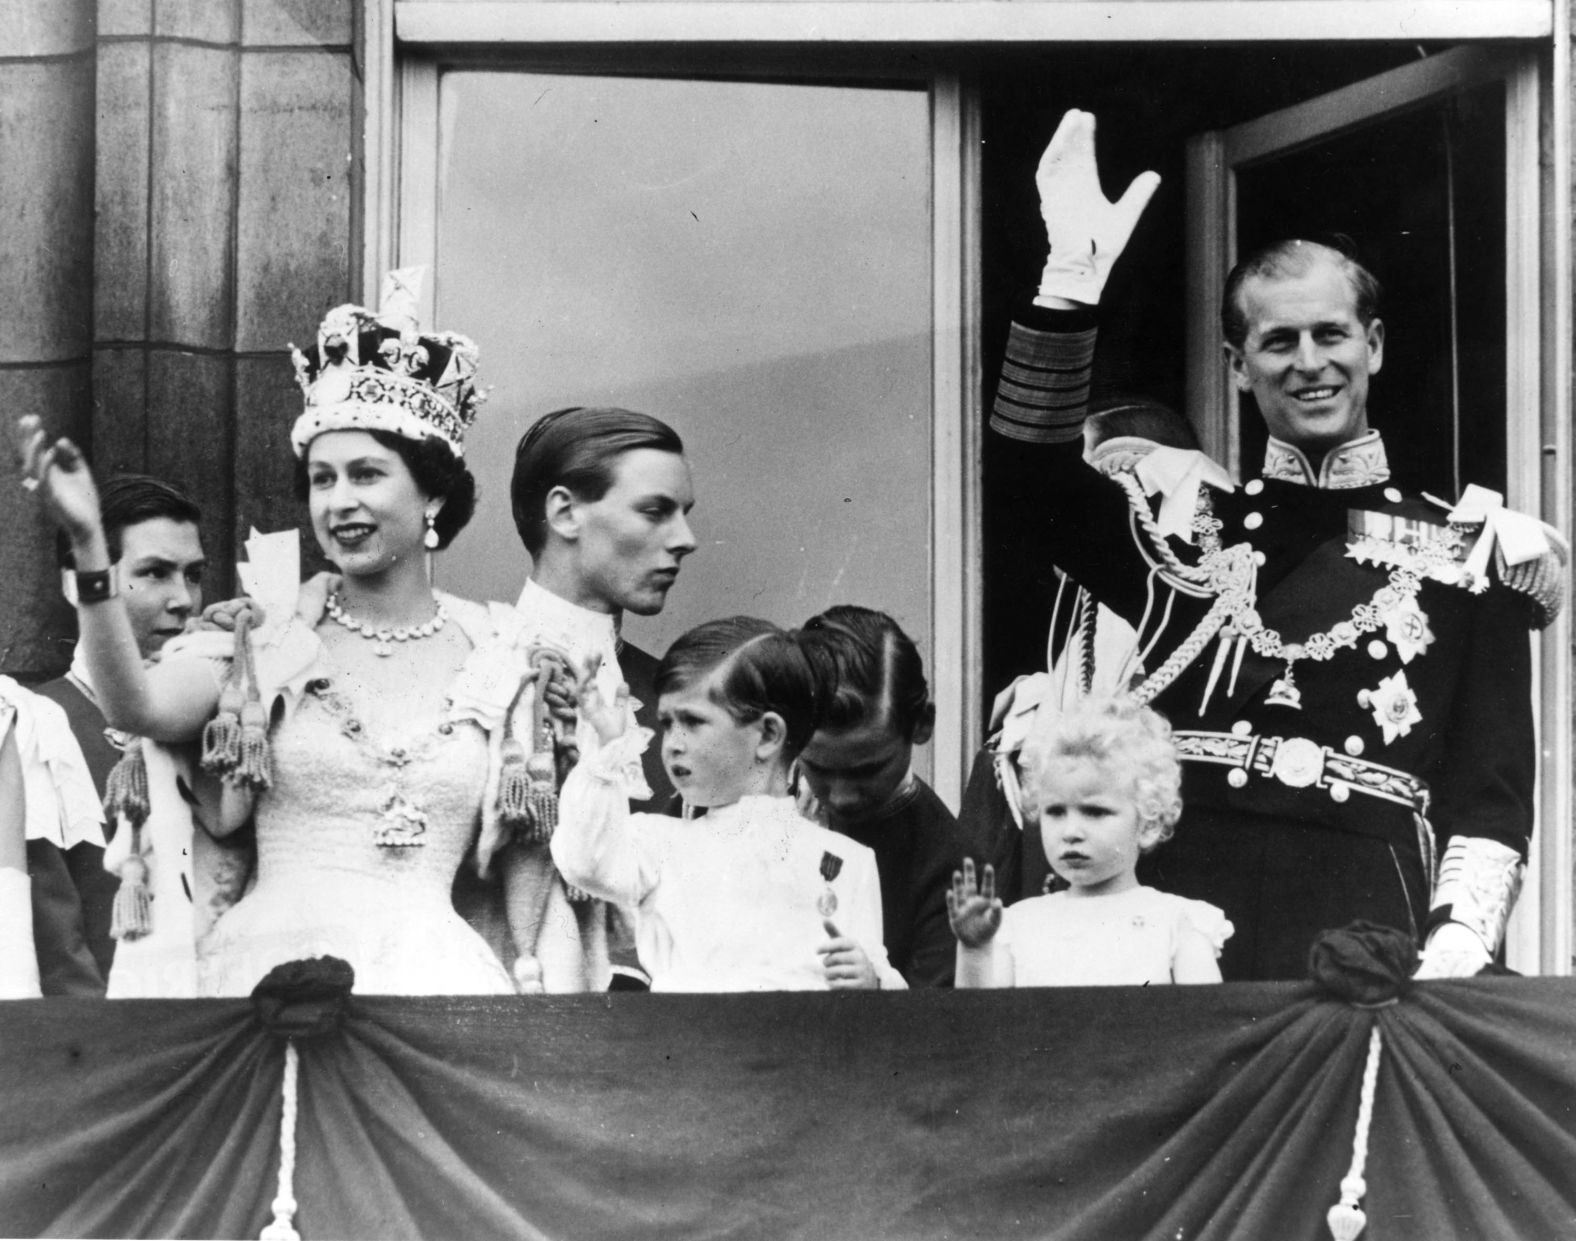 Prince Philip waves from the balcony of Buckingham Palace after his wife's coronation in June 1953.